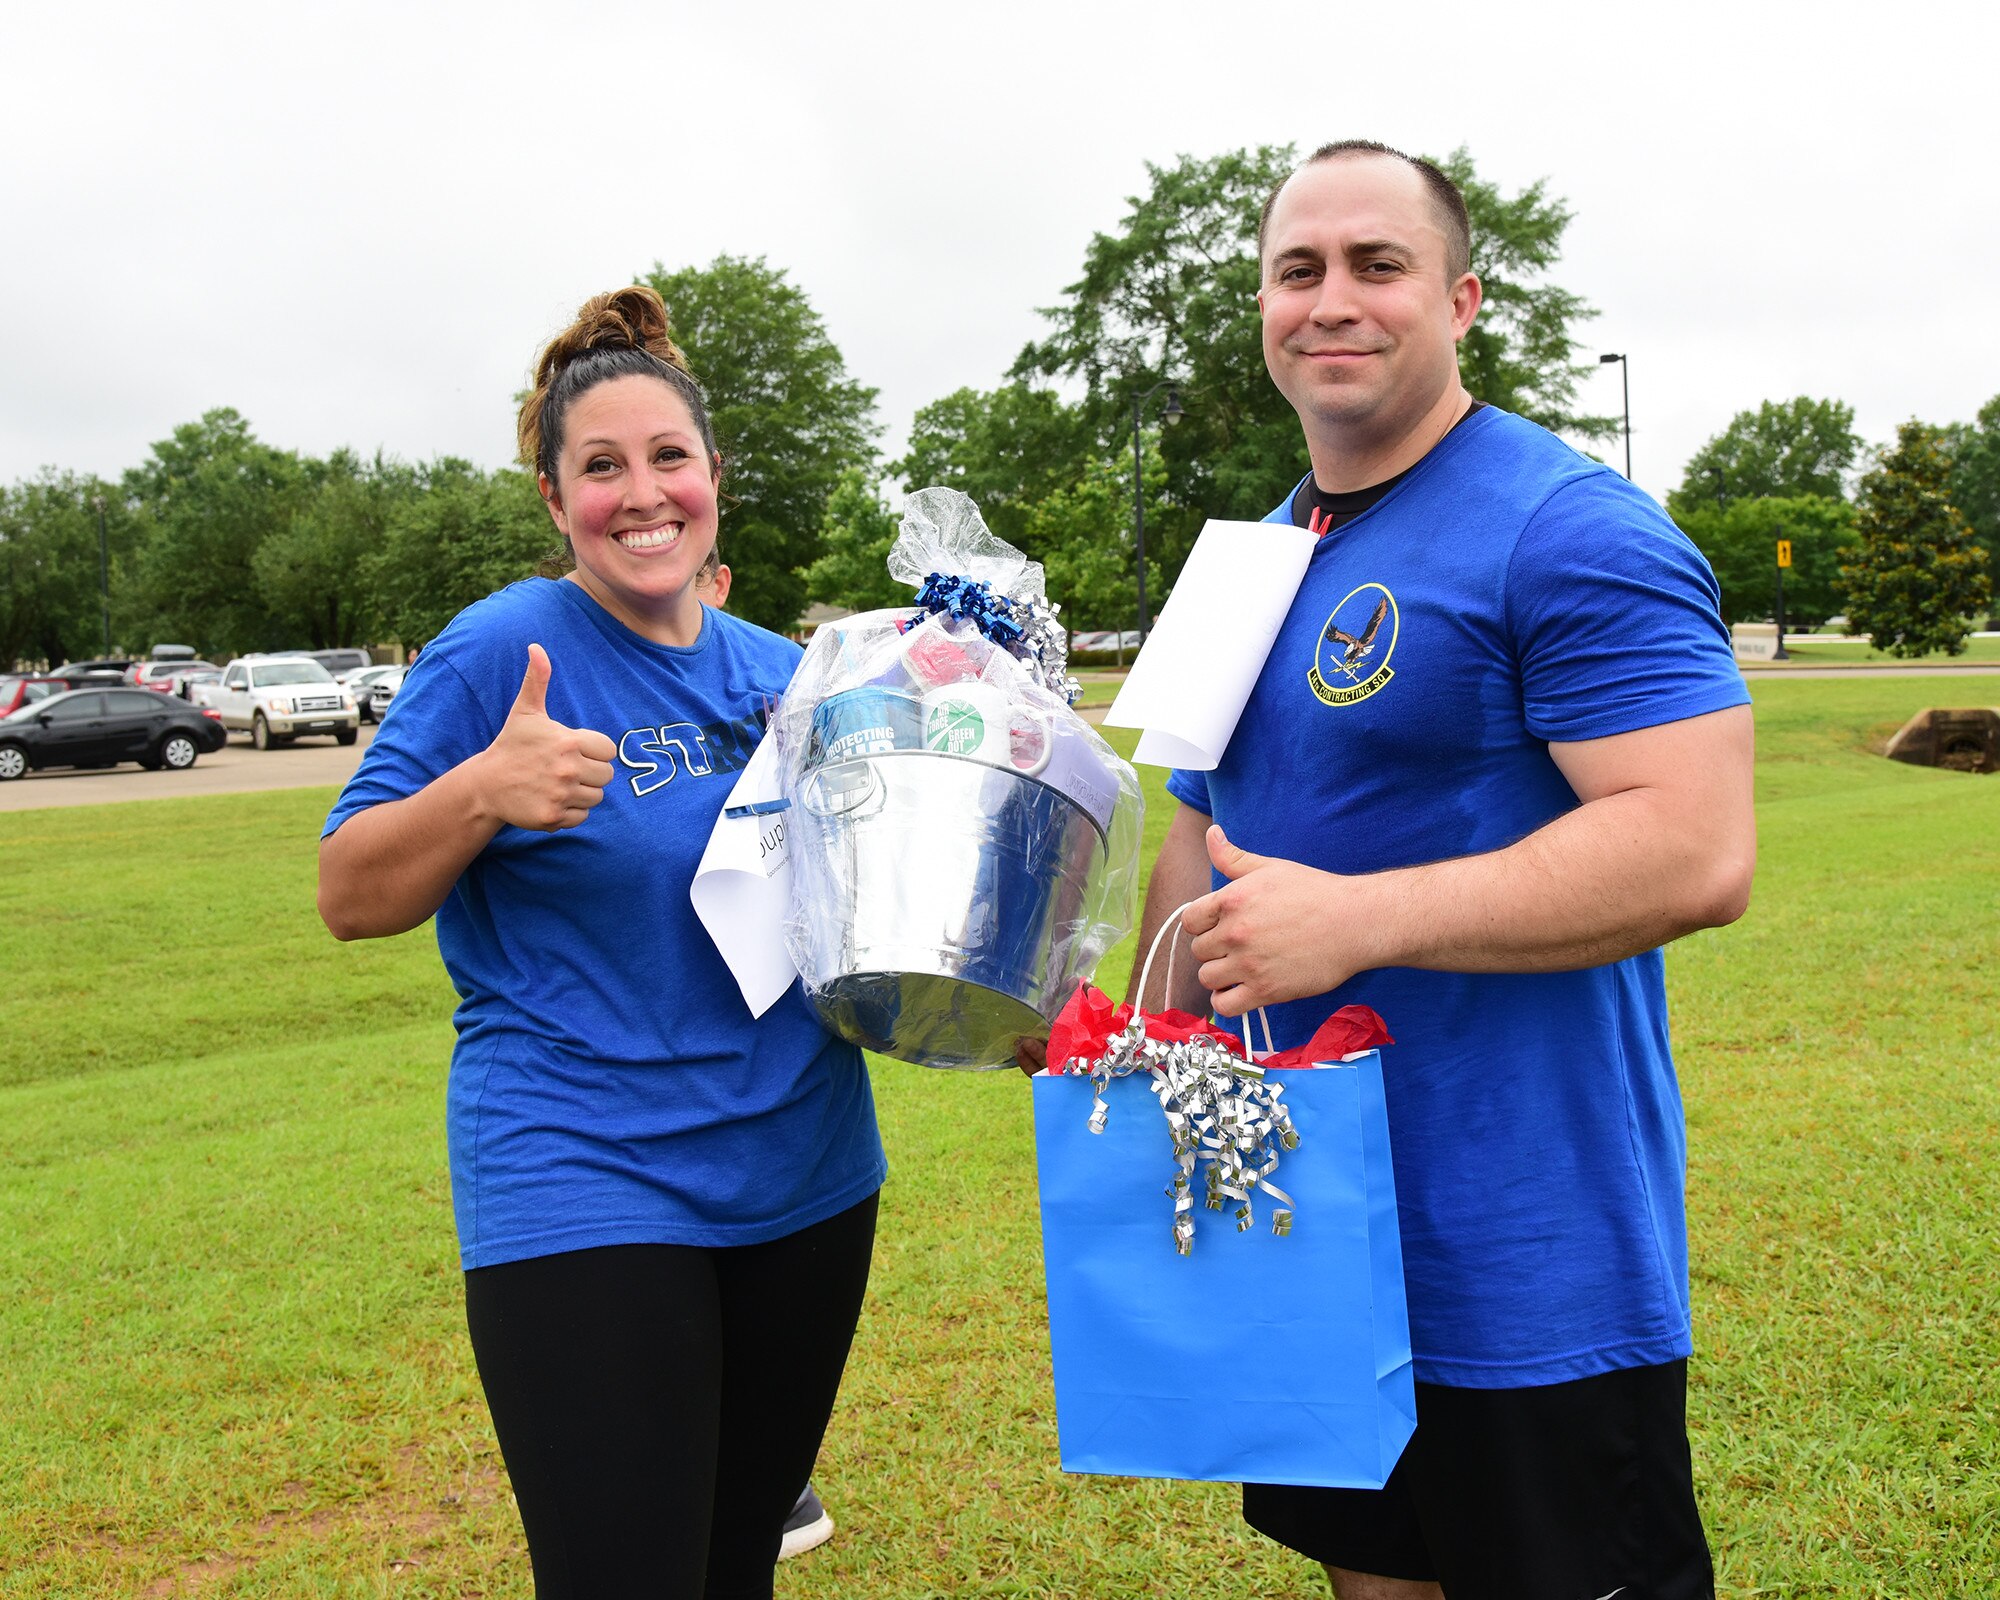 Military spouses participate in various challenges during the Military Spouse Appreciation Day barbeque May 10, 2019, on Columbus Air Force Base, Miss. Similar to the challenges in the international game show, Minute to Win It, spouse groups raced against each other in a competition to see who could complete the challenges in the shortest amount of time. (U.S. Air Force photo by Melissa Doublin)